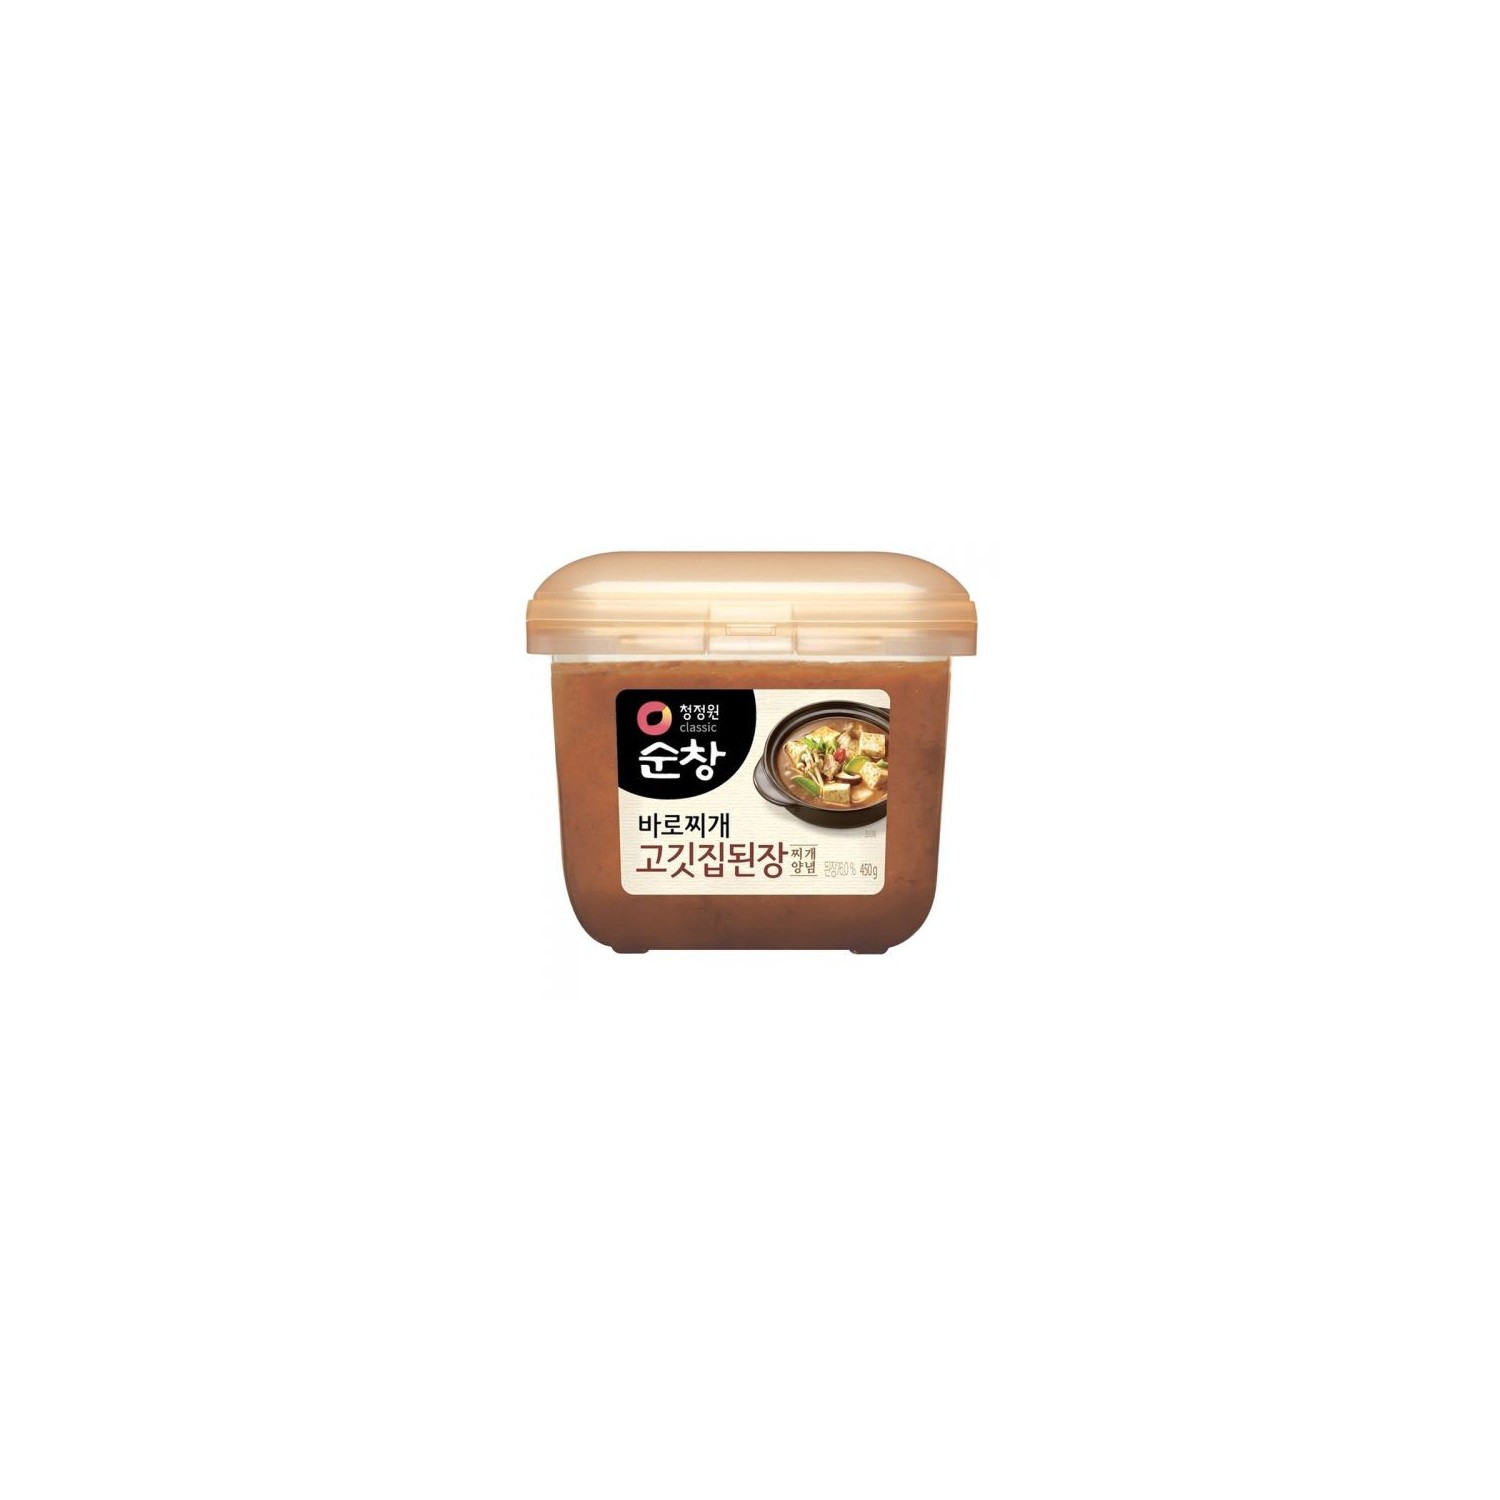 Chung Jung One 450g Korean Soybean Paste for soup with Anchovy